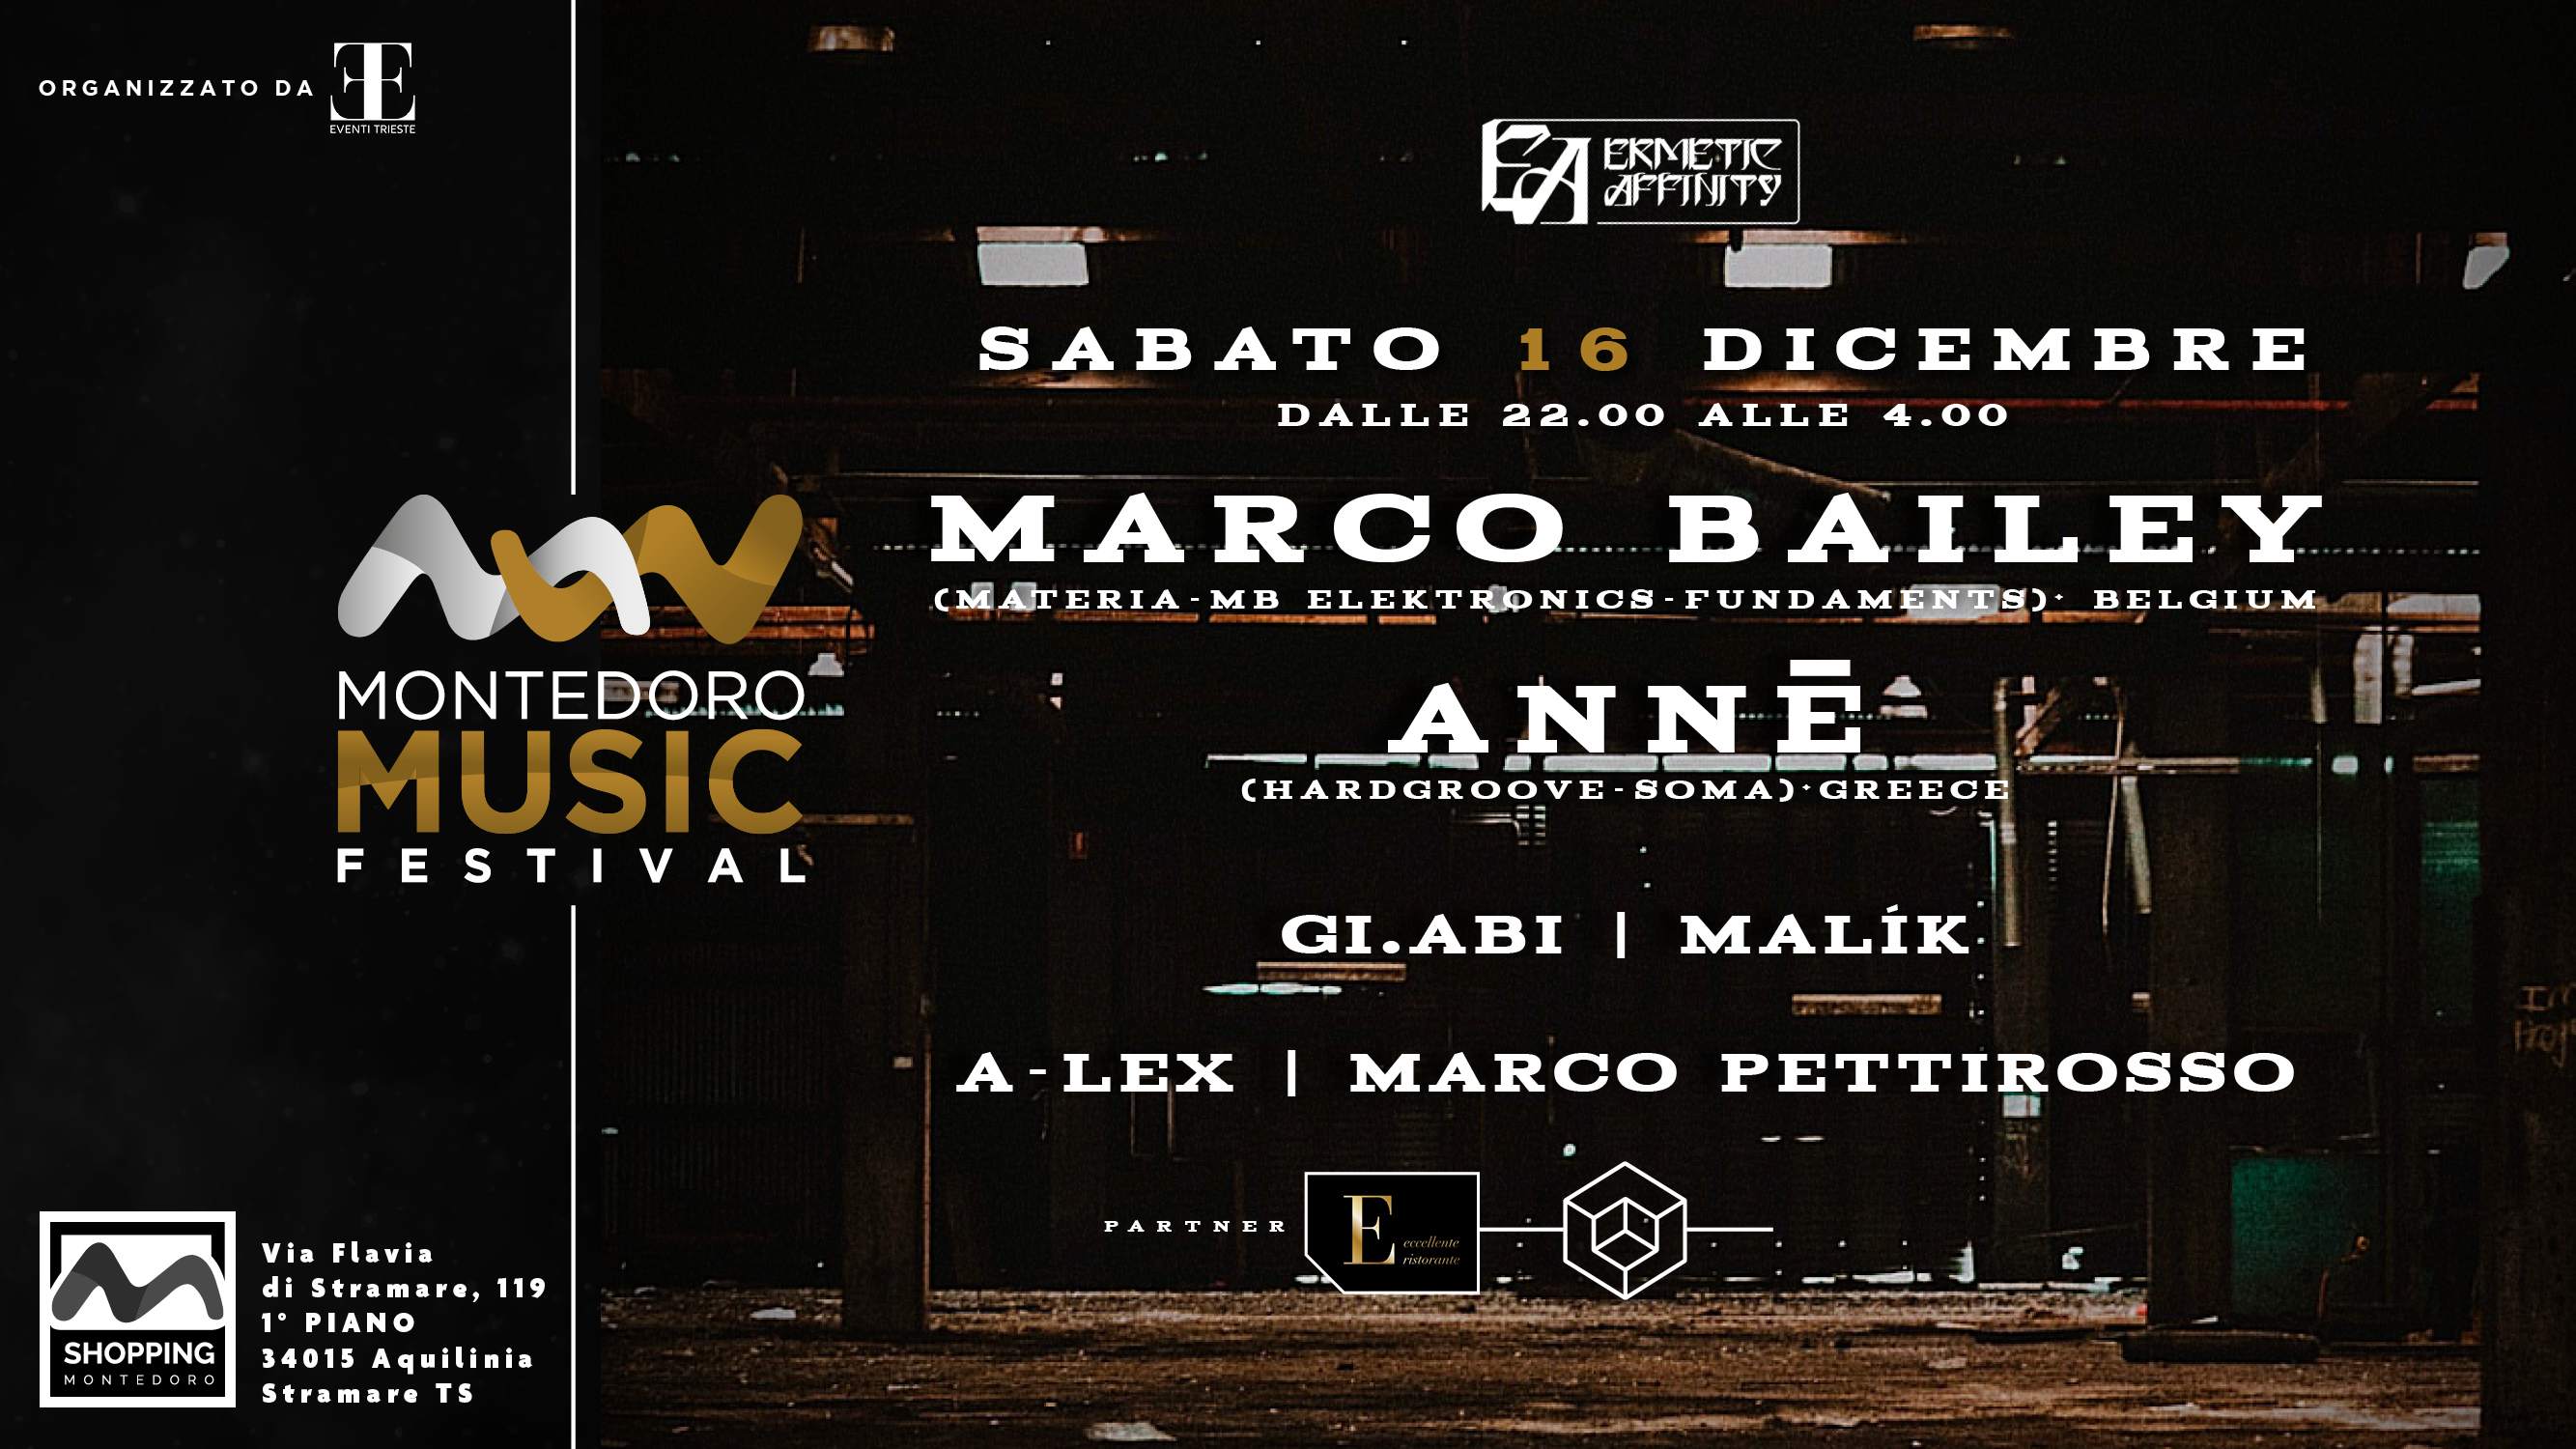 MONTEDORO MUSIC FESTIVAL with ERMETIC AFFINITY present: Marco Bailey & ANNĒ - Página trasera